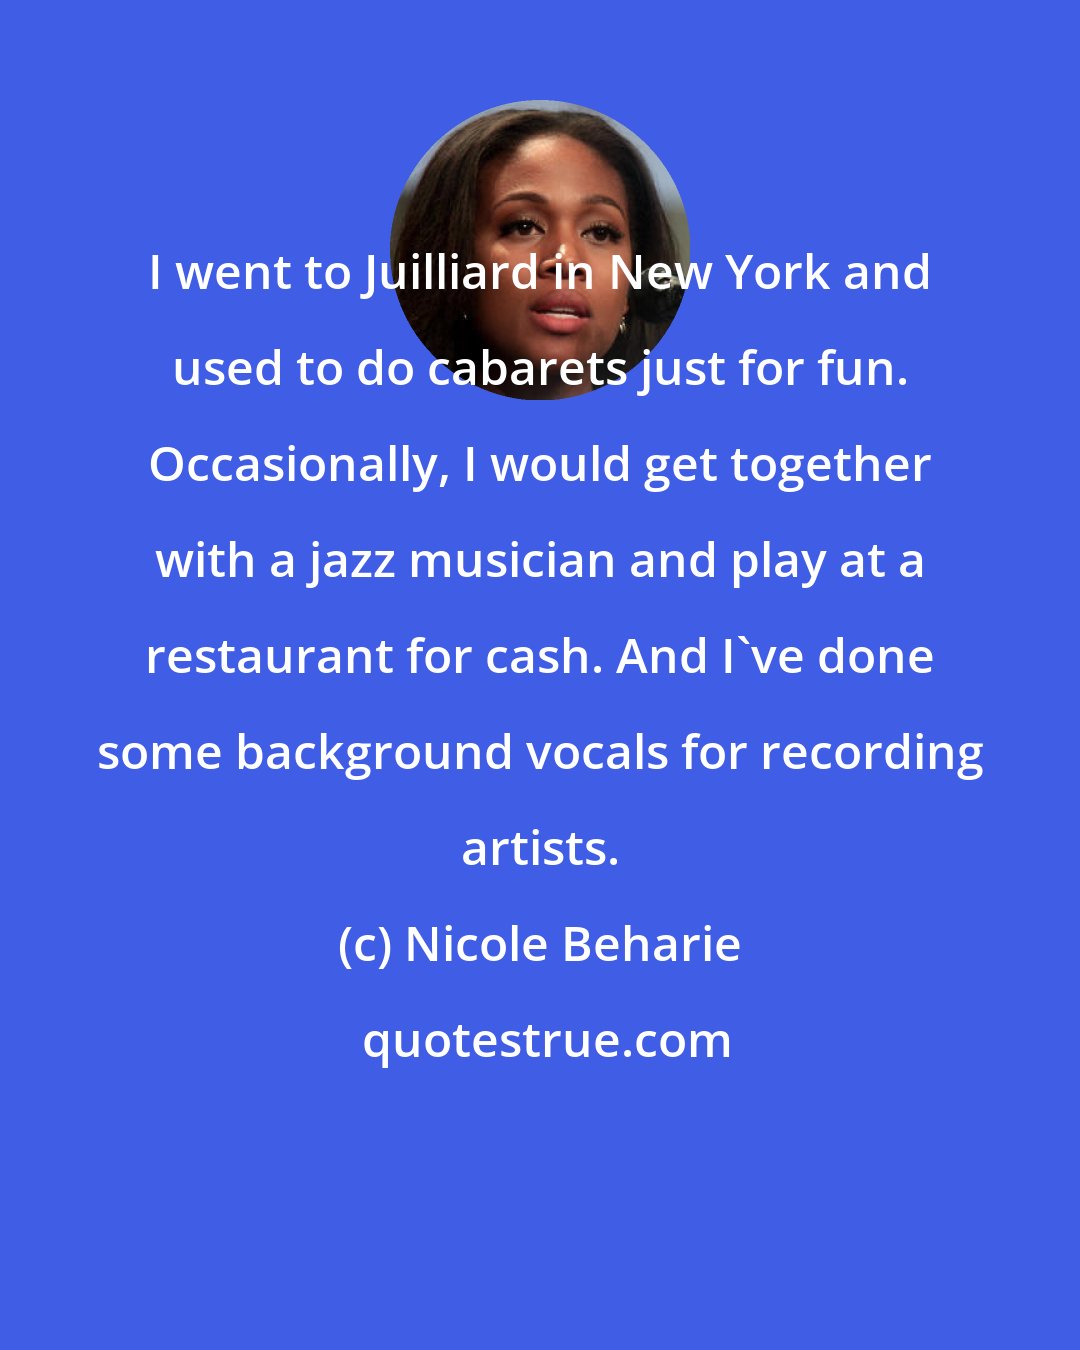 Nicole Beharie: I went to Juilliard in New York and used to do cabarets just for fun. Occasionally, I would get together with a jazz musician and play at a restaurant for cash. And I've done some background vocals for recording artists.